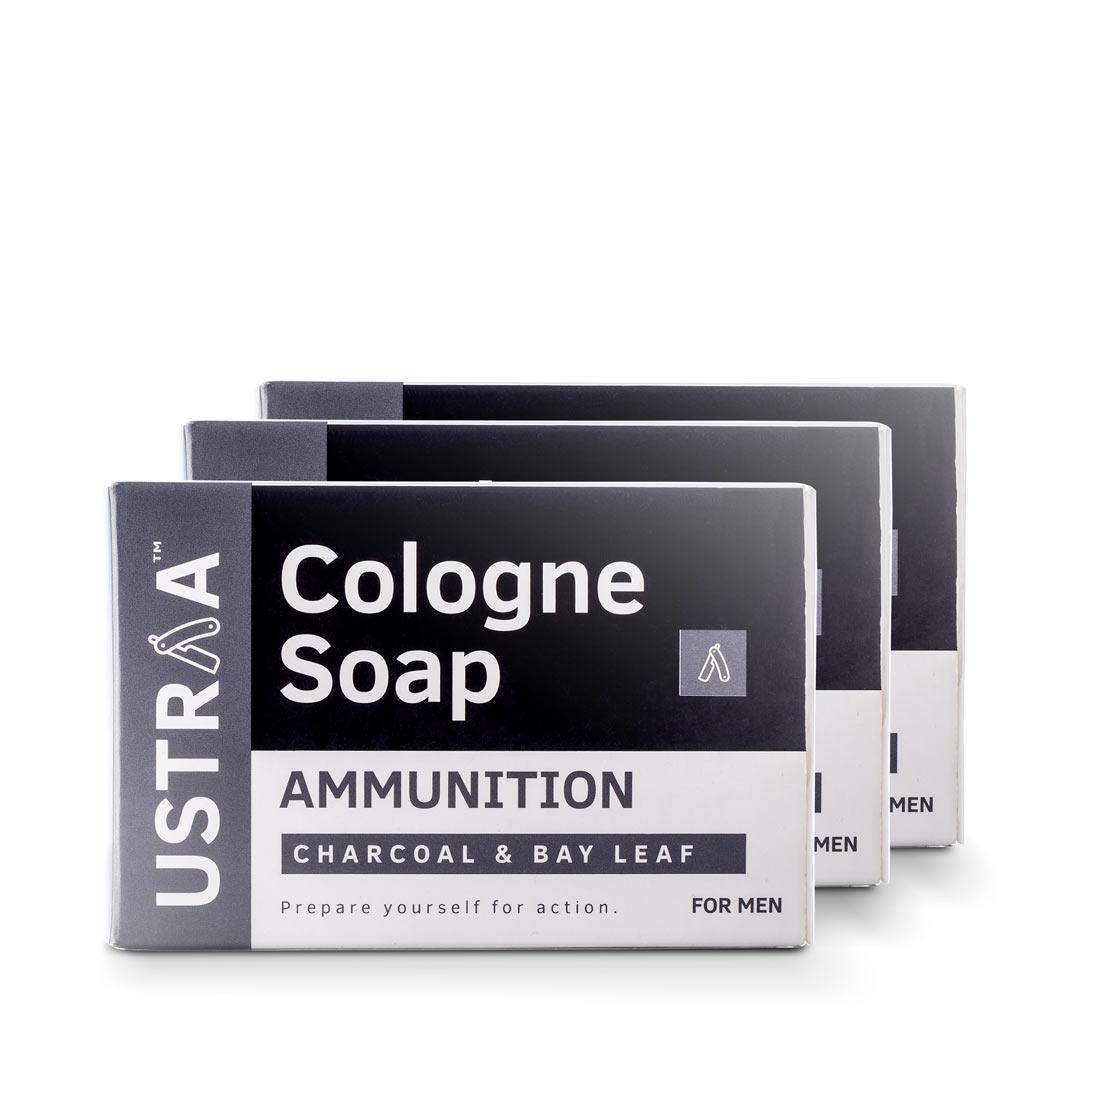 Ustraa Ammunition Cologne Soap with Charcoal and Bay Leaf (Pack of 3)